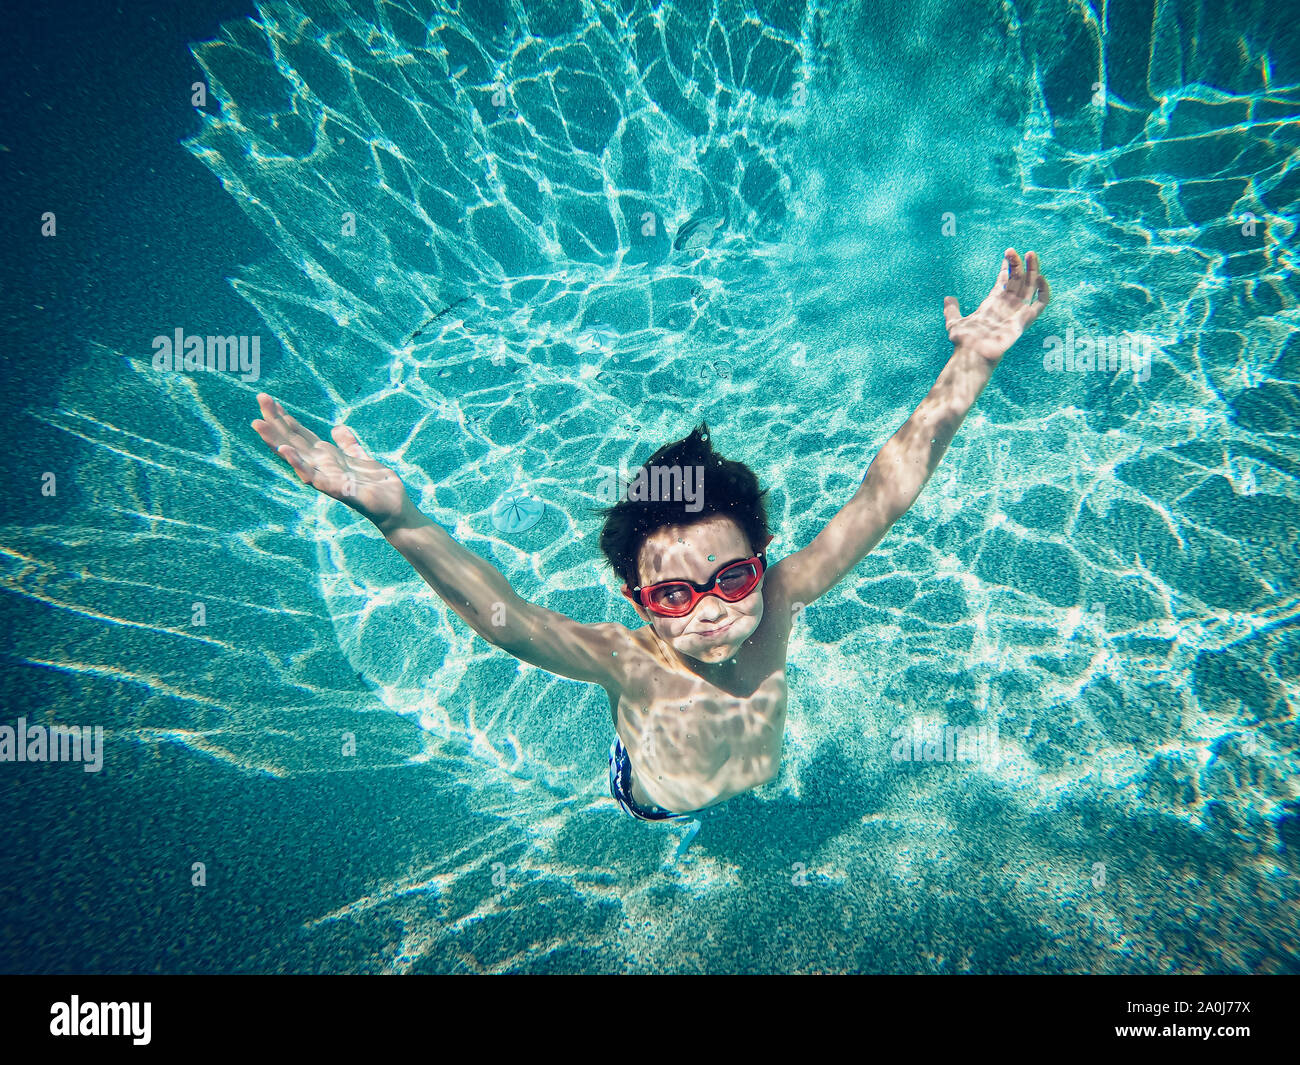 Underwater image of young boy floating in a swimming pool. Stock Photo